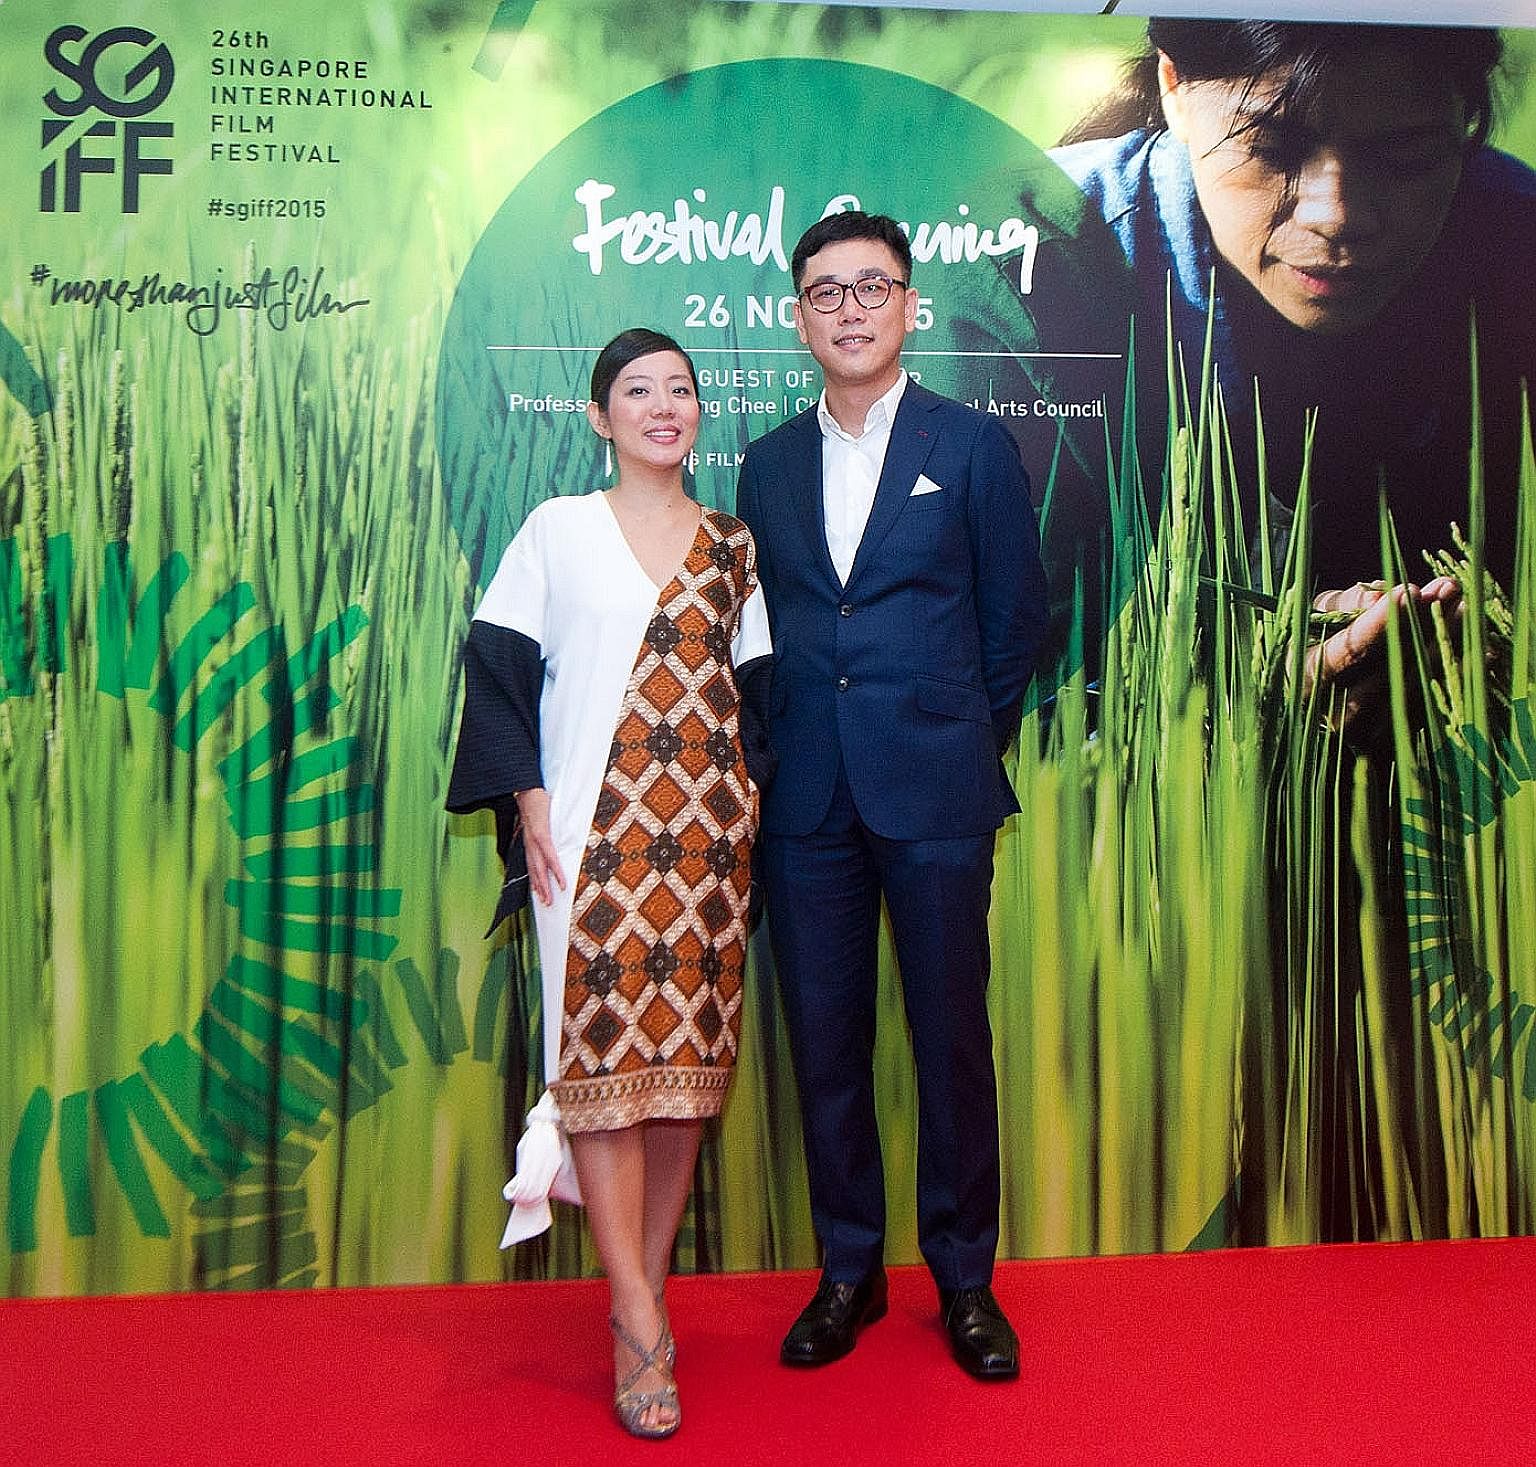 Above: Ms Yuni Hadi, the Singapore International Film Festival's executive director, and Mr Zhang Wenjie, who has quit as its festival director, at its 2015 edition.